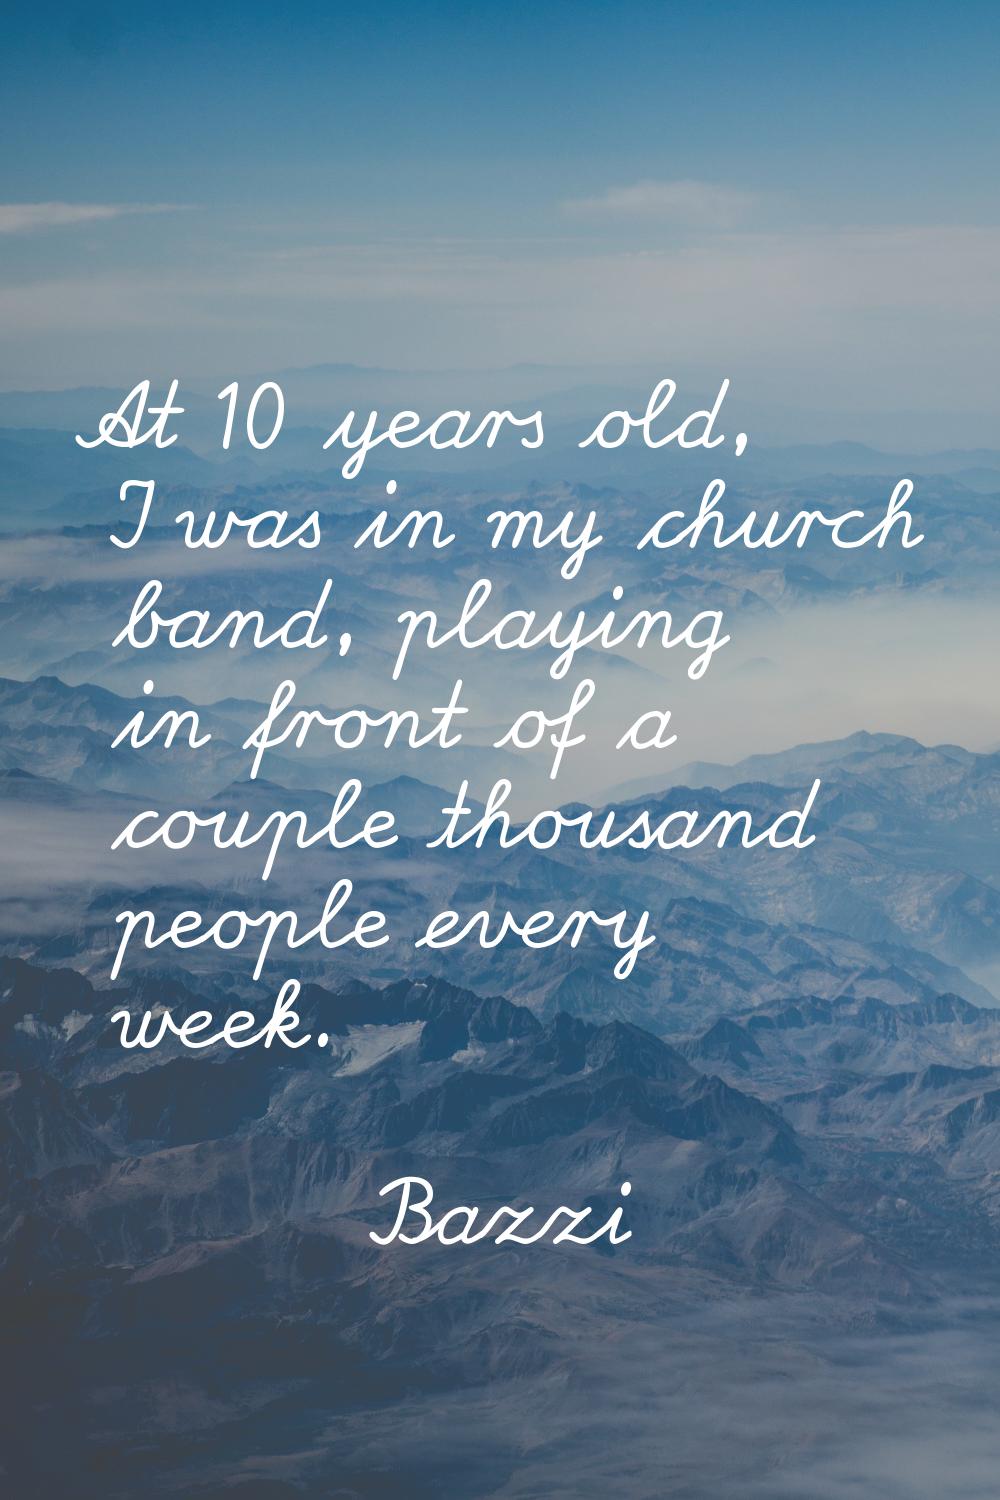 At 10 years old, I was in my church band, playing in front of a couple thousand people every week.